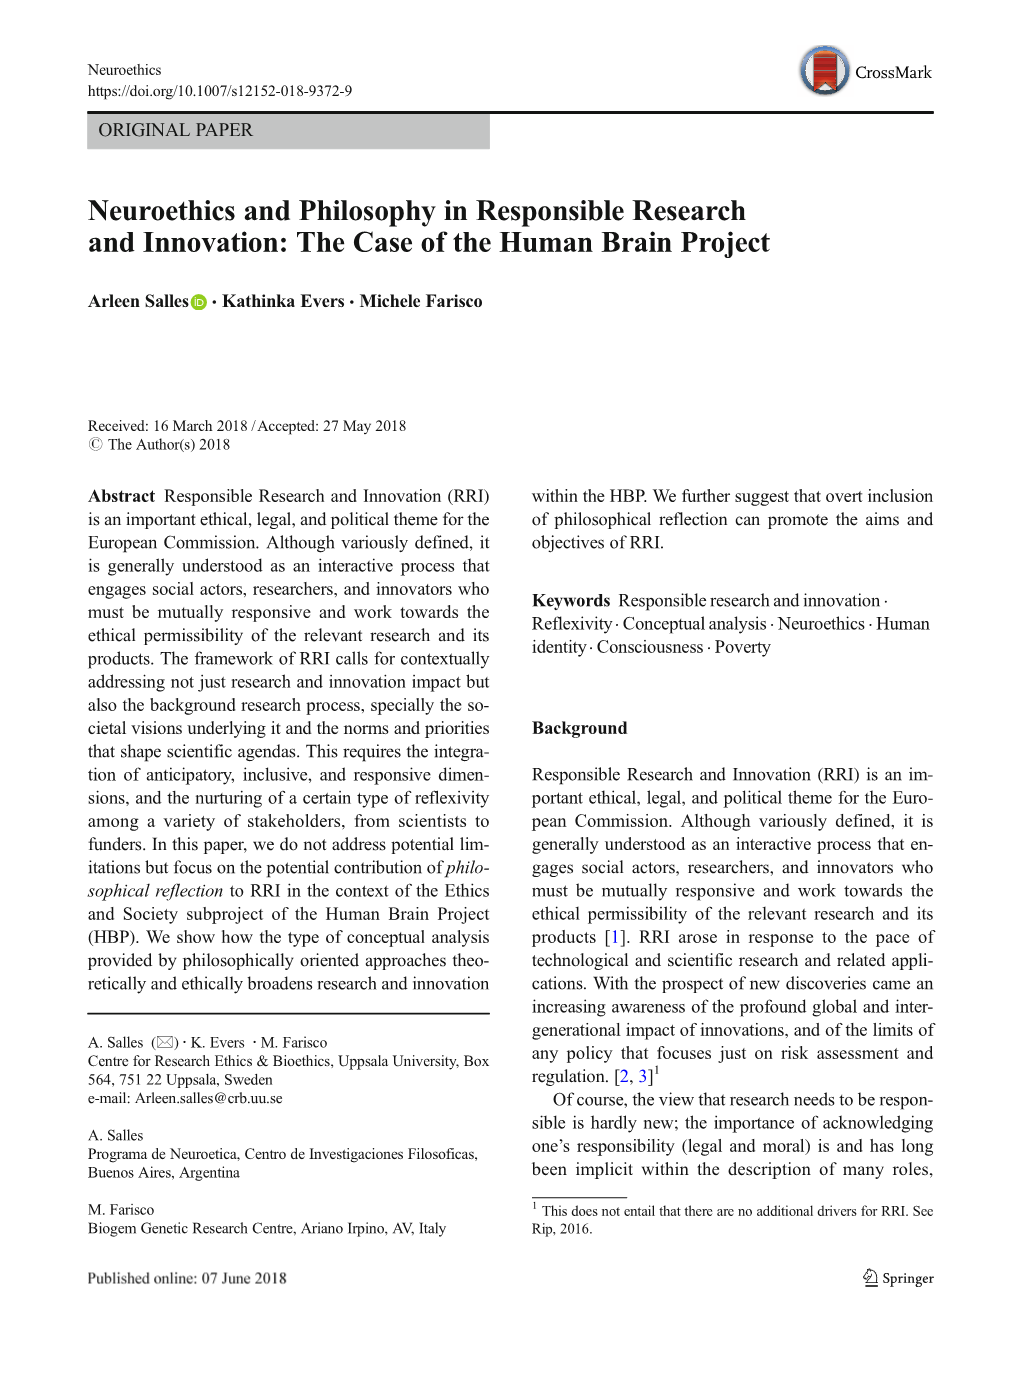 Neuroethics and Philosophy in Responsible Research and Innovation: the Case of the Human Brain Project